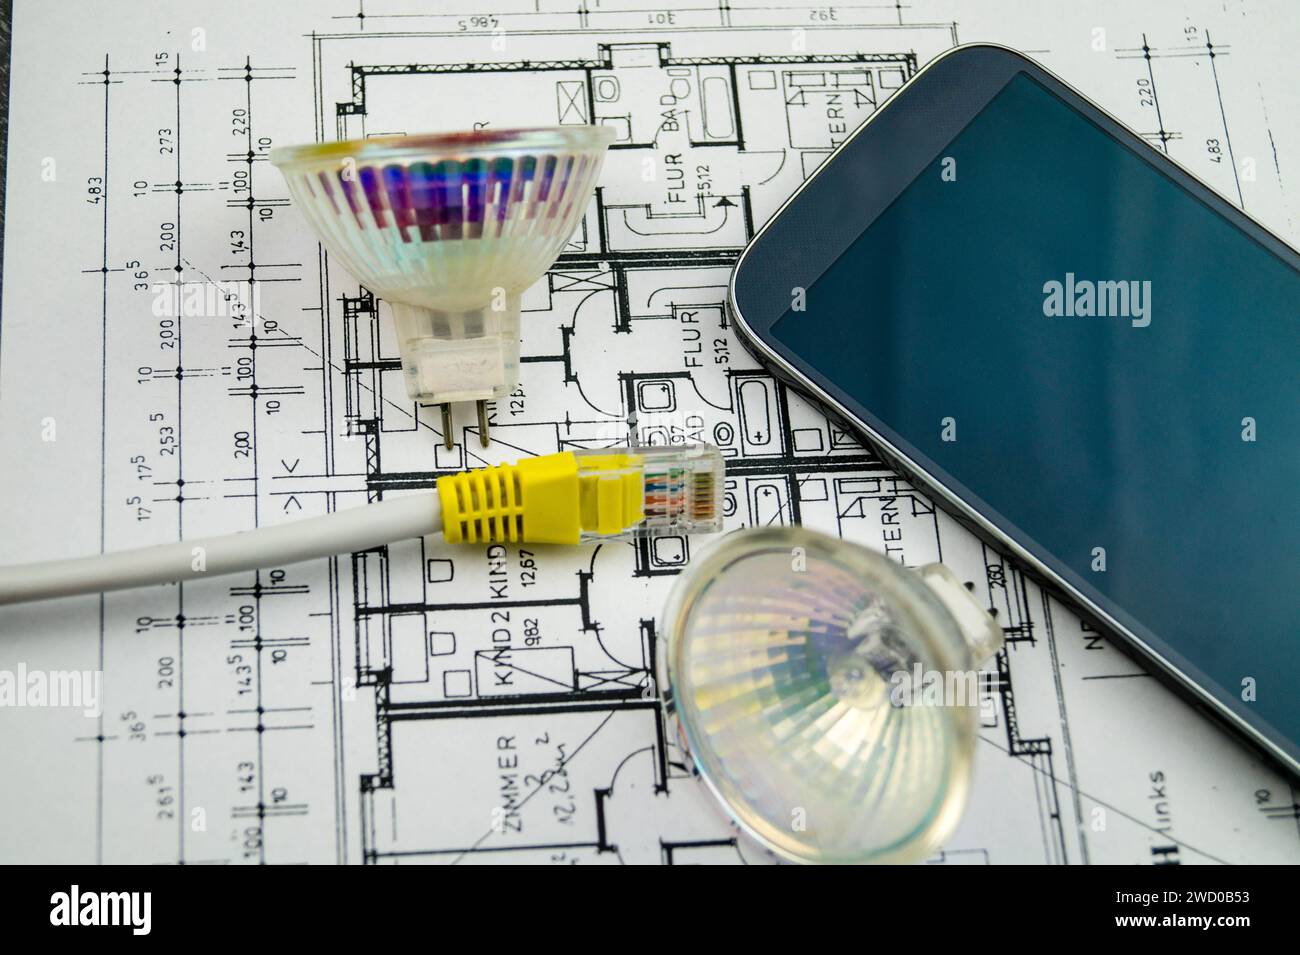 reflector lamps, network cable and smartphone on construction drawing, symbolic image for Smart Home Stock Photo